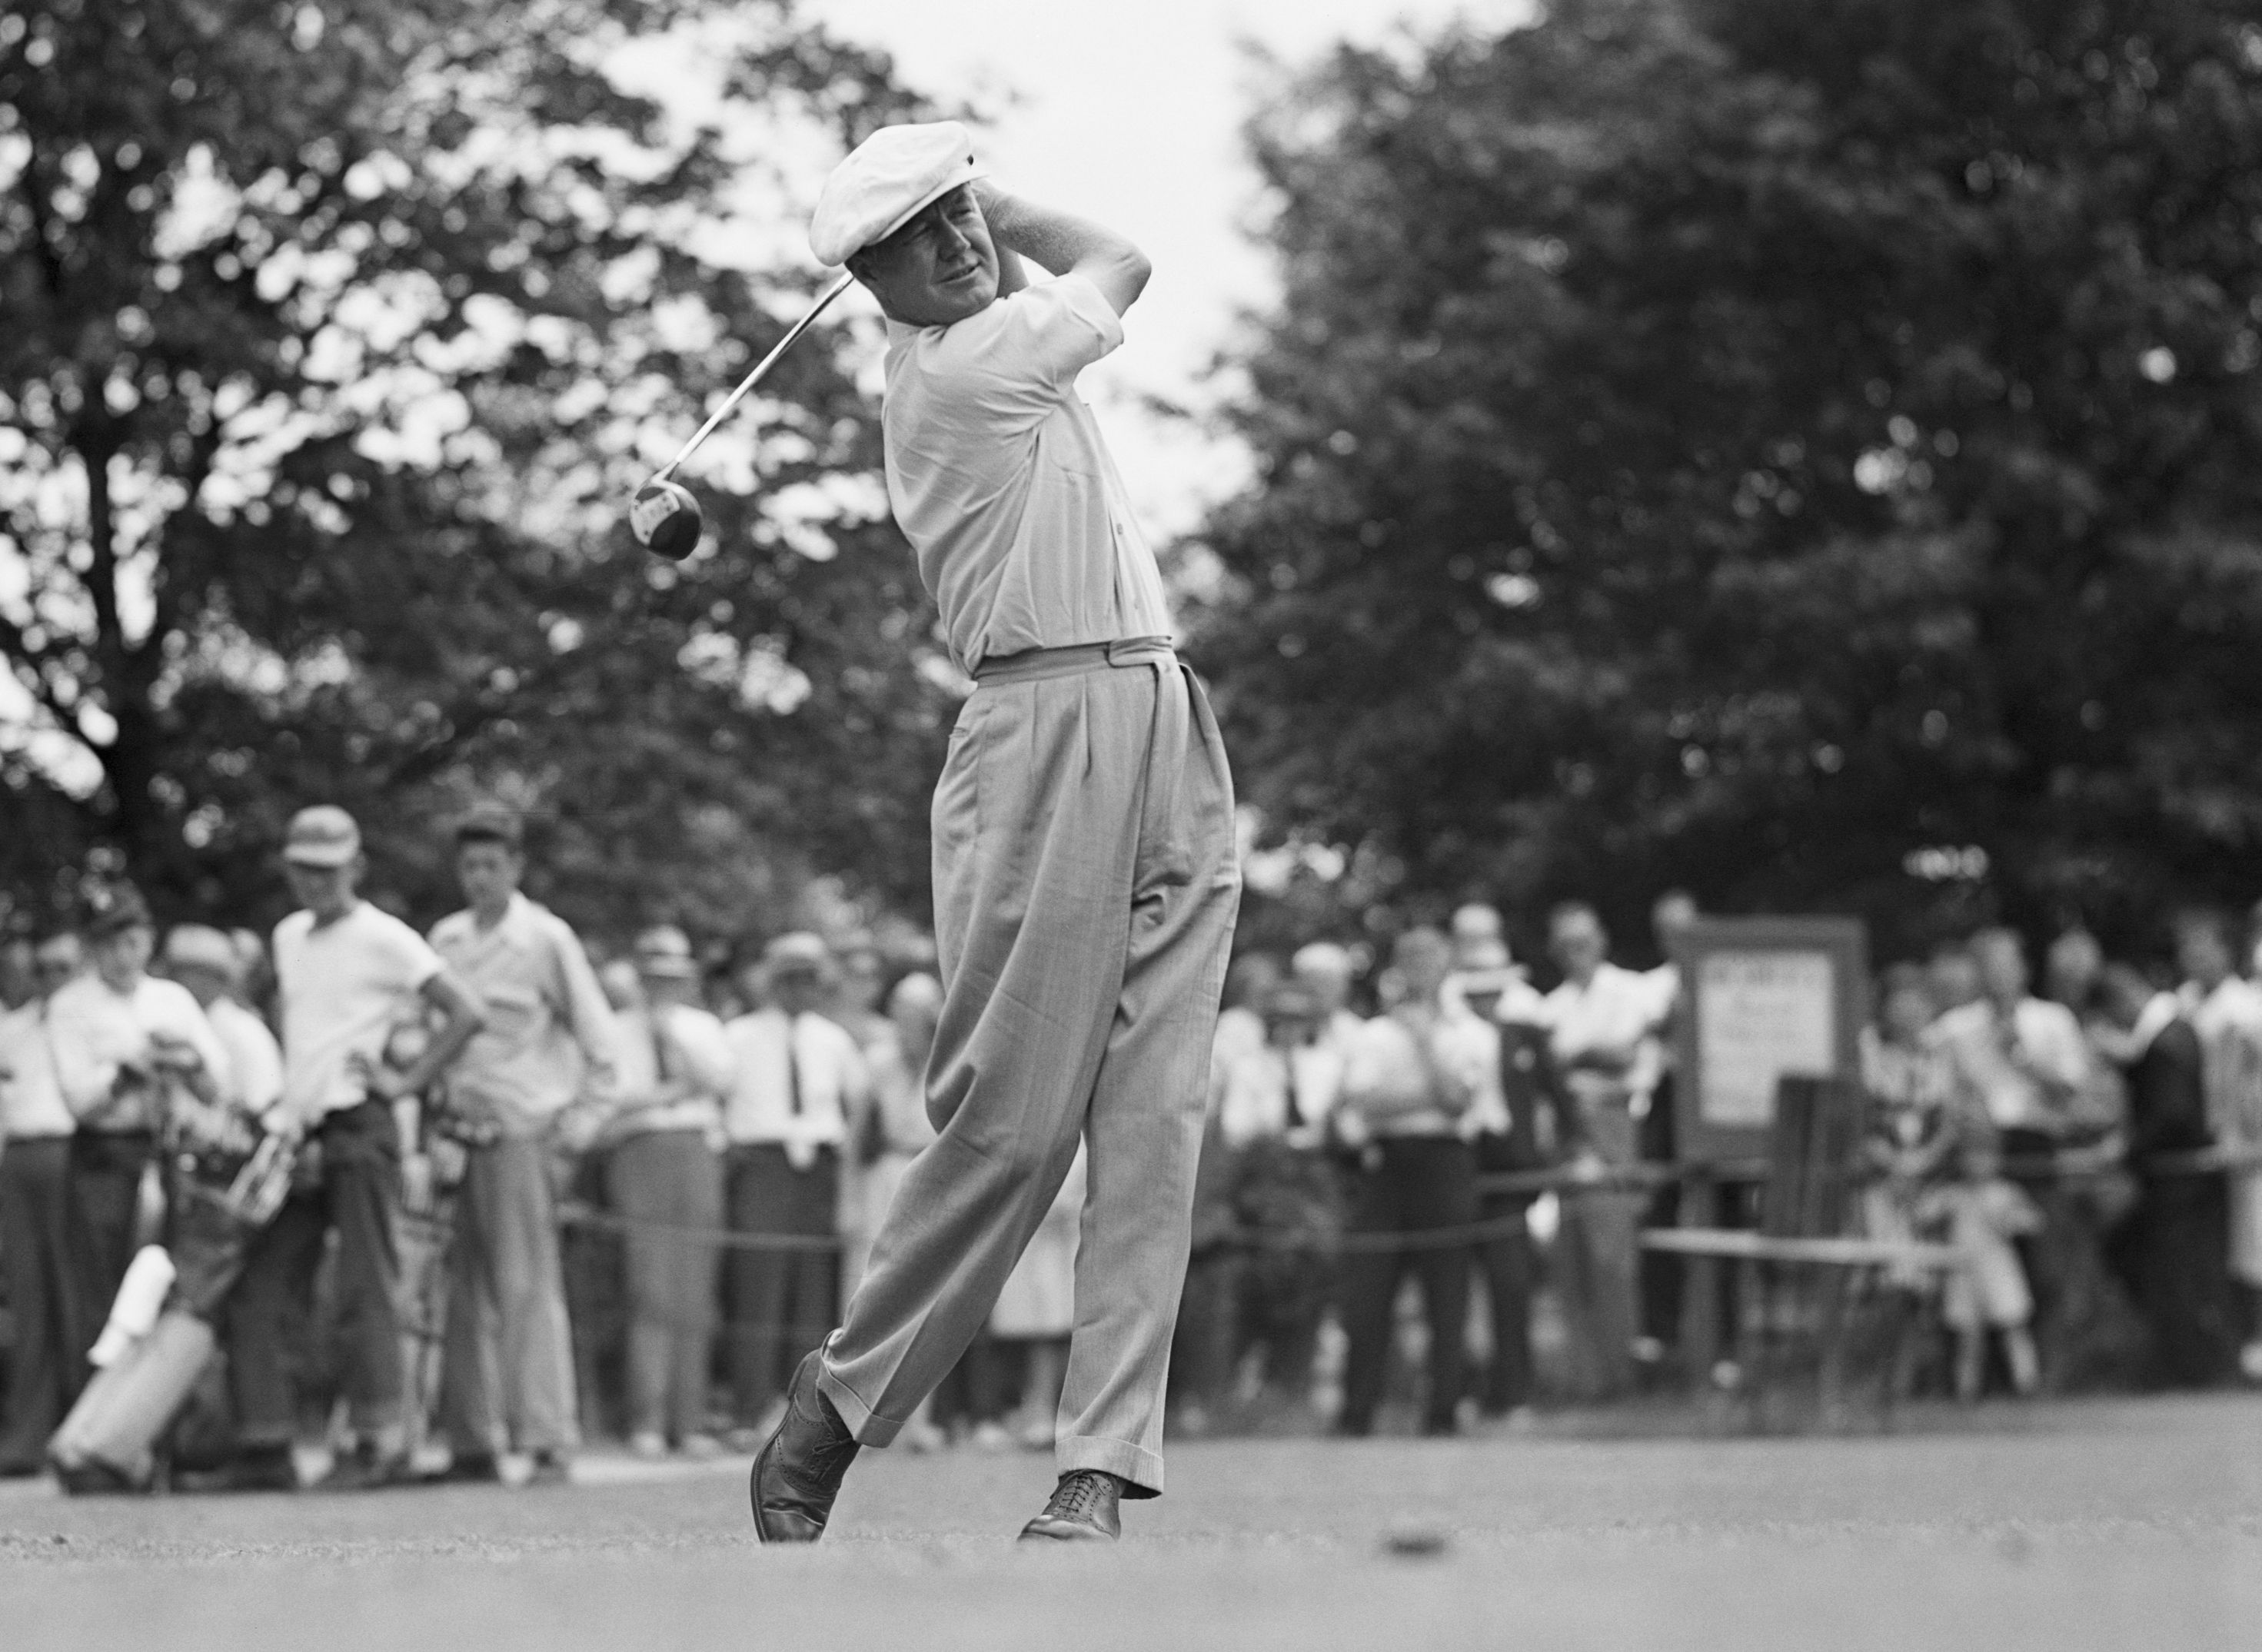 Bryon Nelson's Winning Streak and 1945 Tournament Results